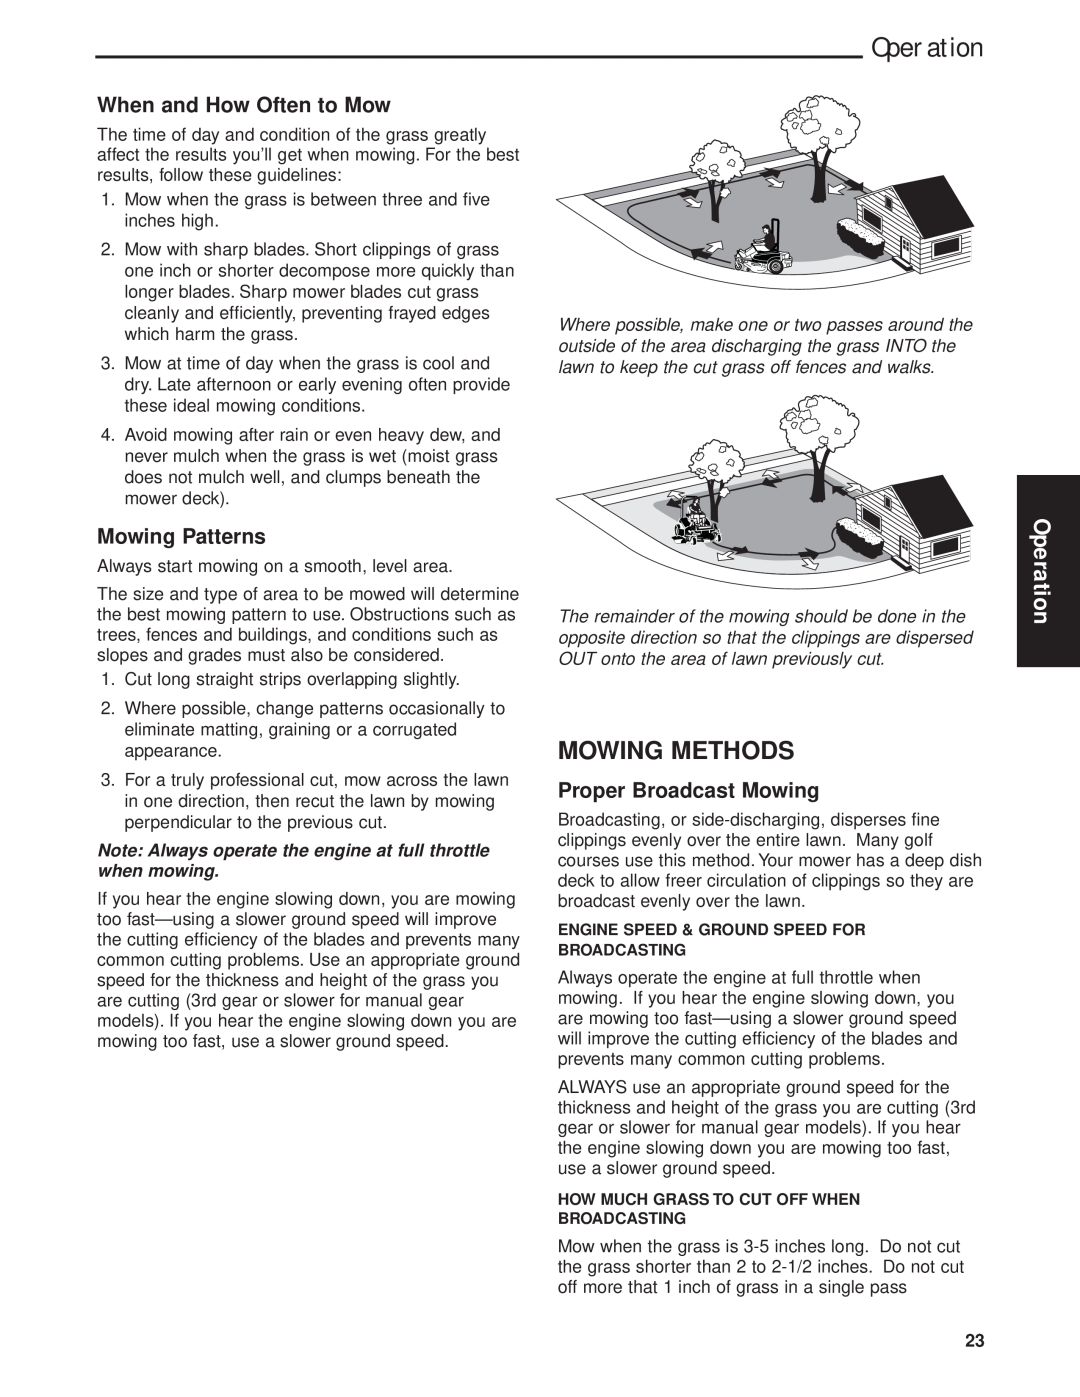 Briggs & Stratton 5901170 Mowing Methods, Operation, When and How Often to Mow, Mowing Patterns, Proper Broadcast Mowing 